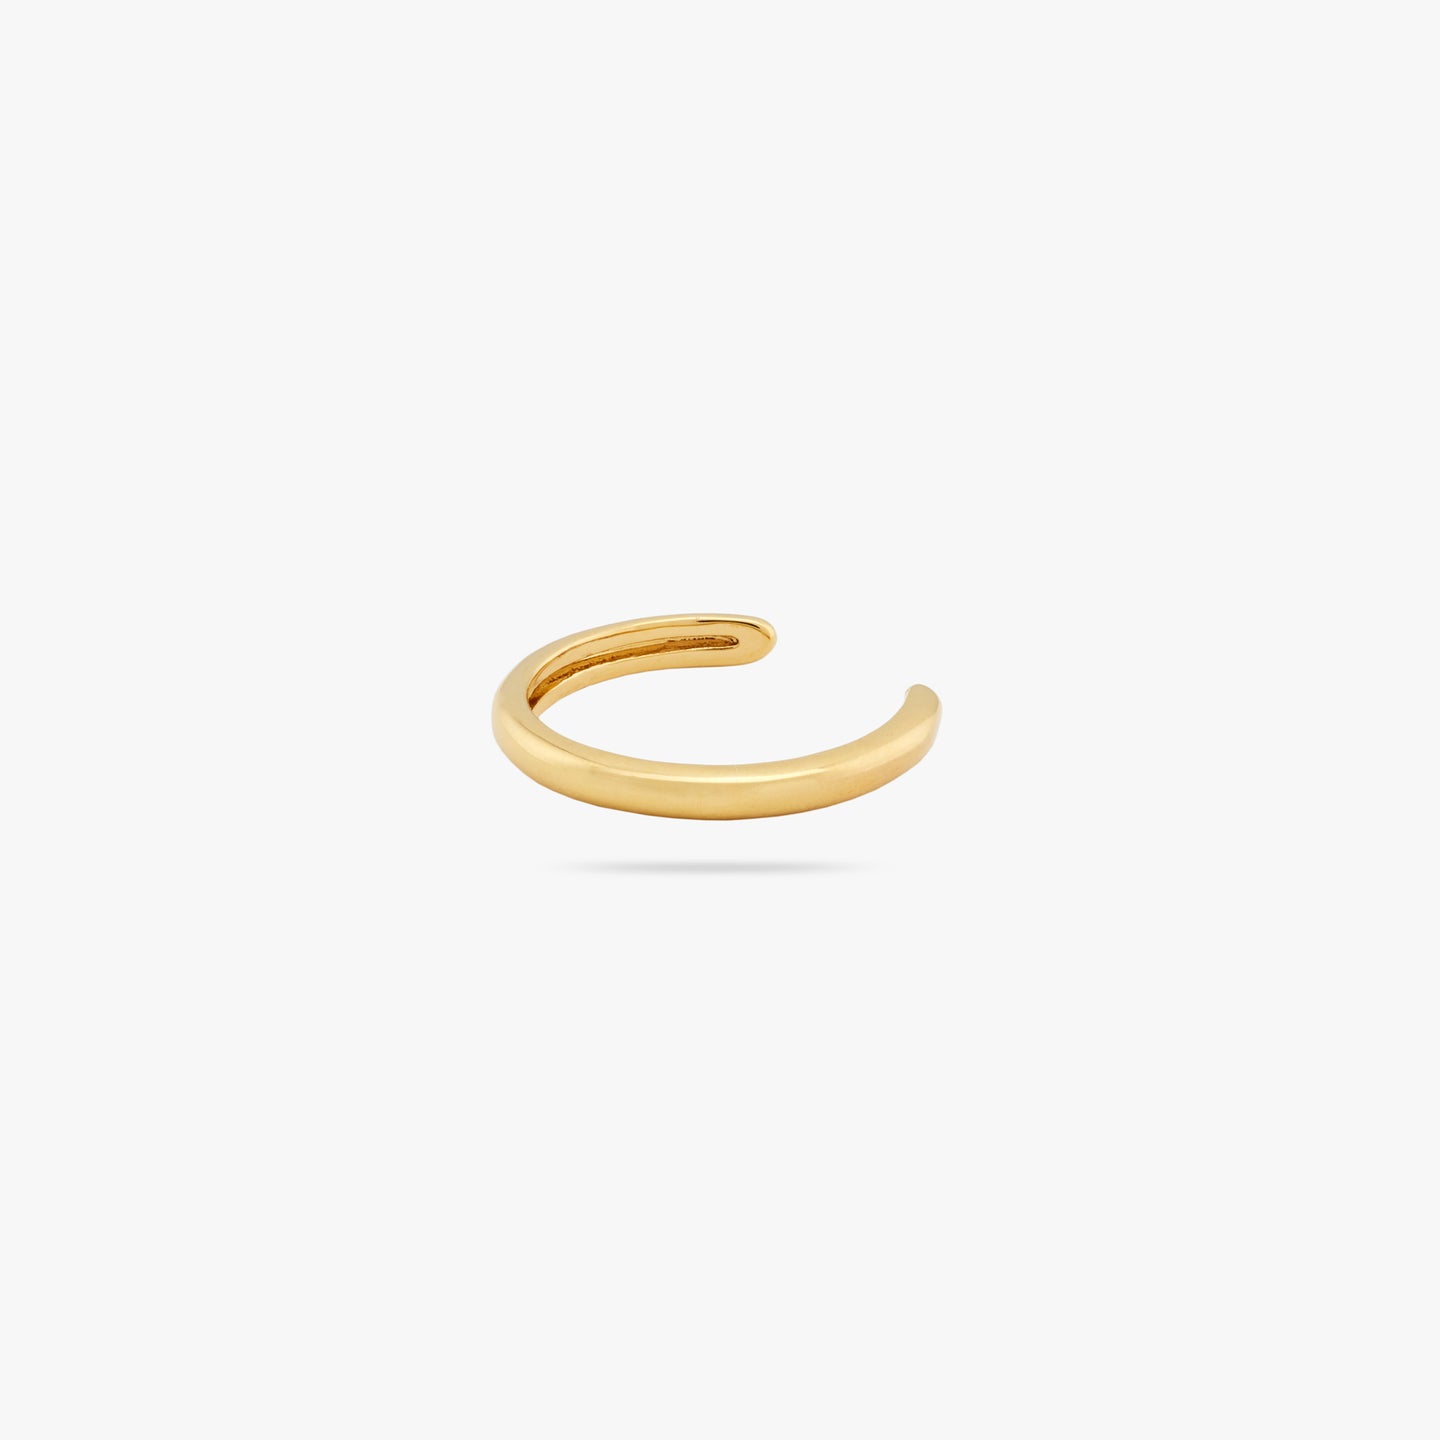 Slim gold ear cuff that requires no piercing. color:null|gold